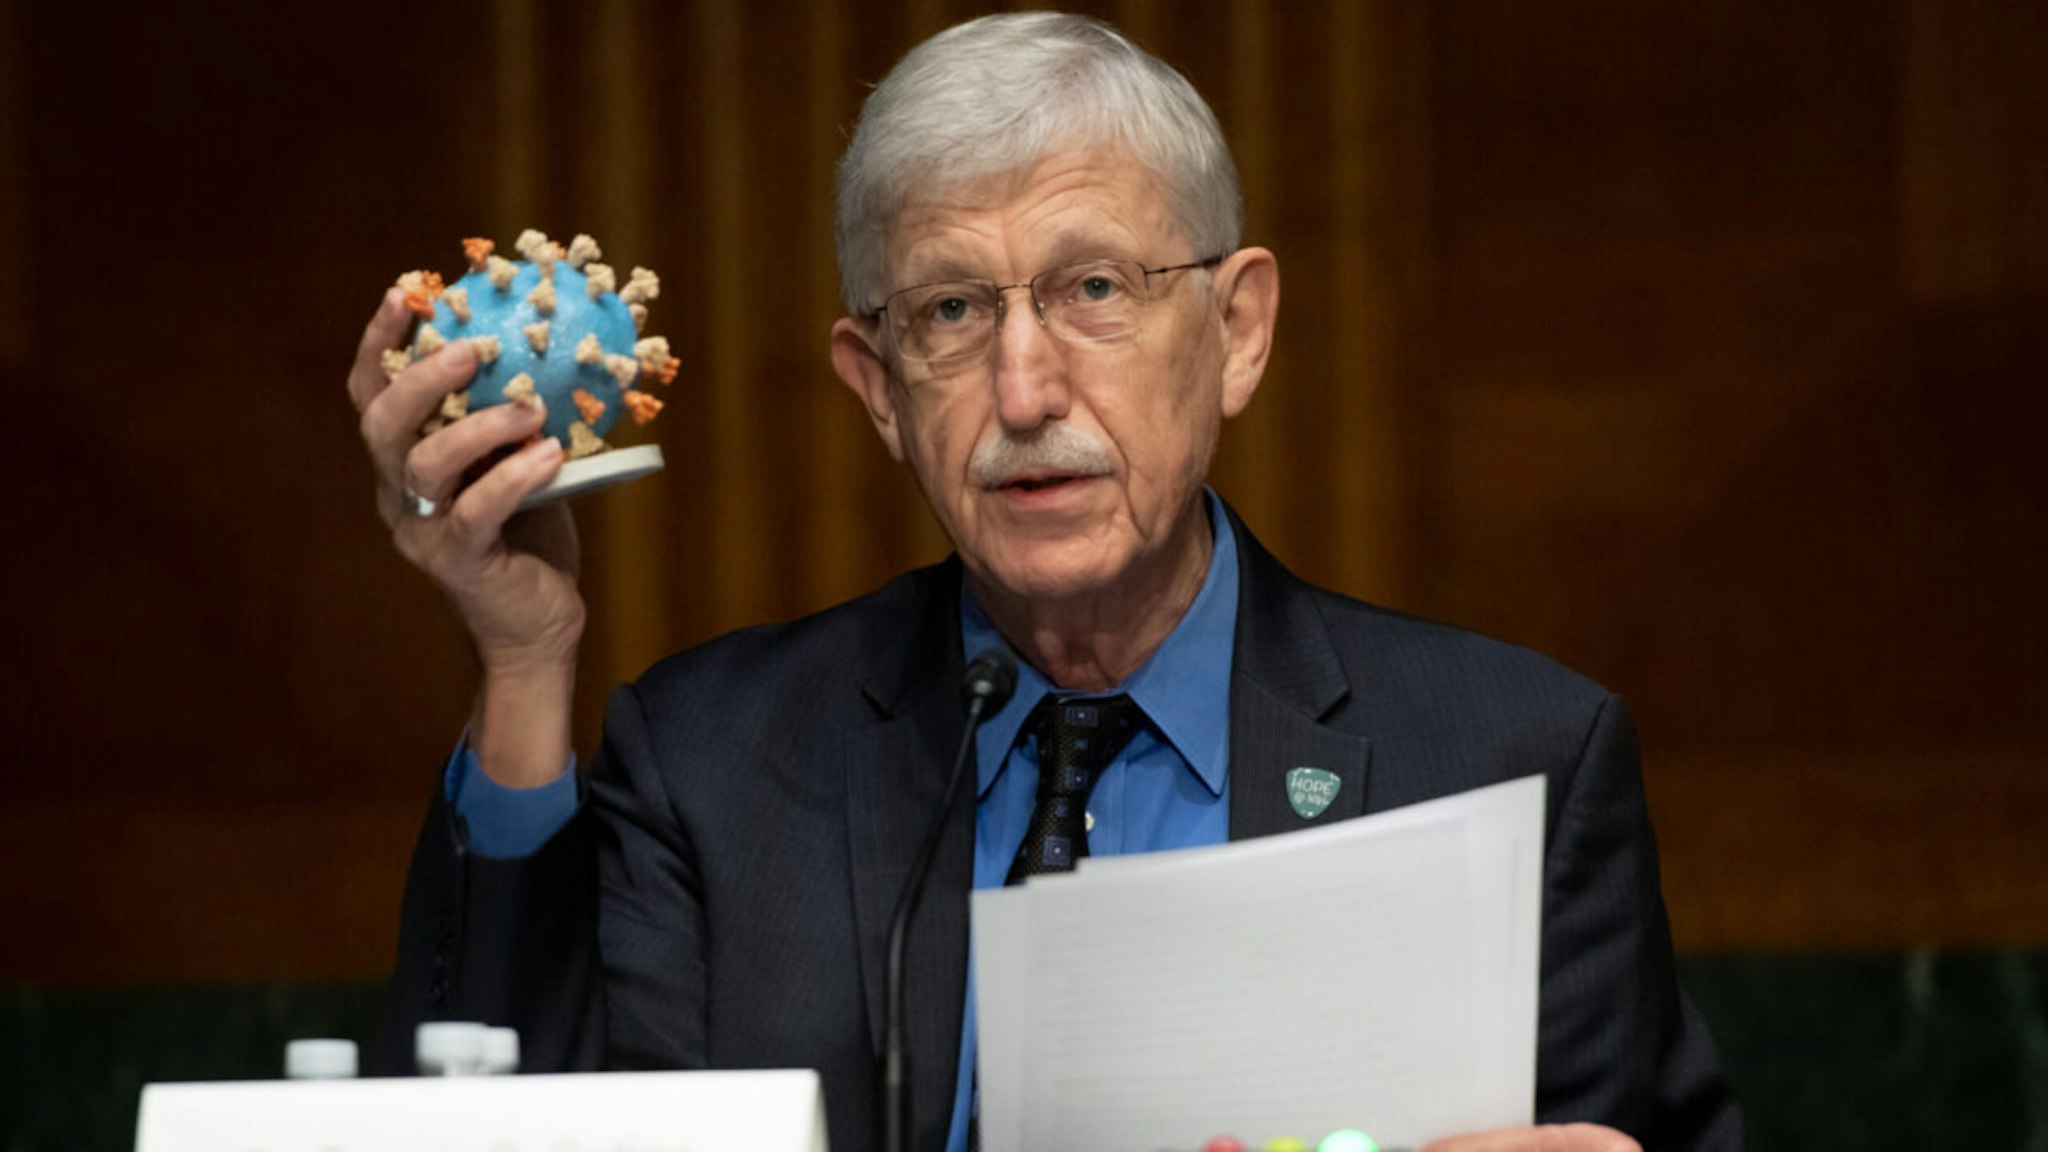 Dr. Francis Collins, Director of the National Institutes of Health (NIH), holds up a model of COVID-19, known as coronavirus, during a US Senate Appropriations subcommittee hearing on the plan to research, manufacture and distribute a coronavirus vaccine, known as Operation Warp Speed, July 2, 2020 on Capitol Hill in Washington, DC.